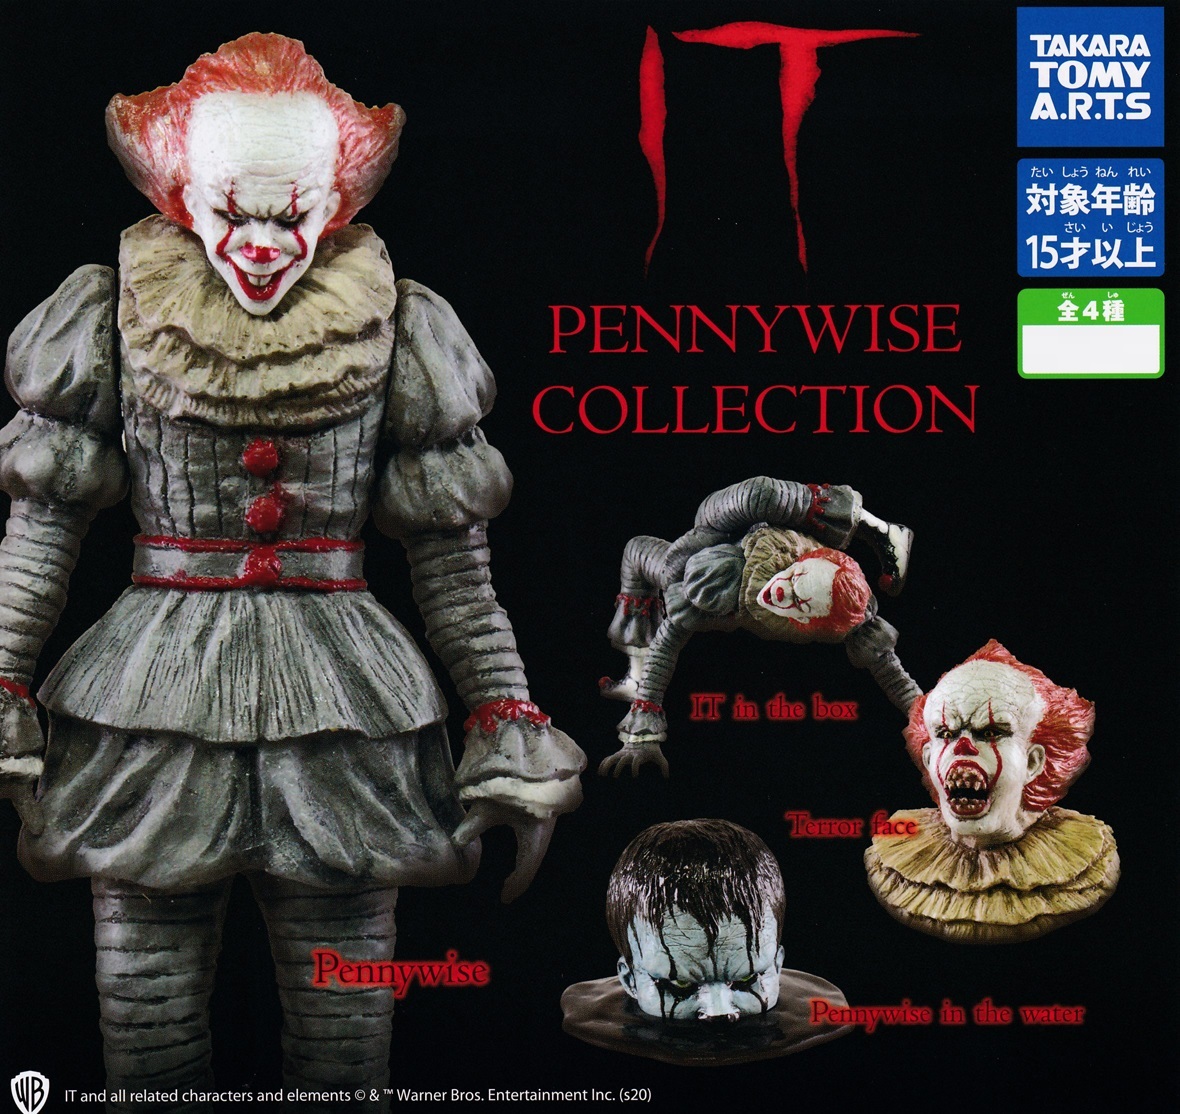 Pennywise in the water　IT PENNYWISE COLLECTION　イット　ペニーワイズ フィギュア ガチャ　ラスト1個_サンプル画像です